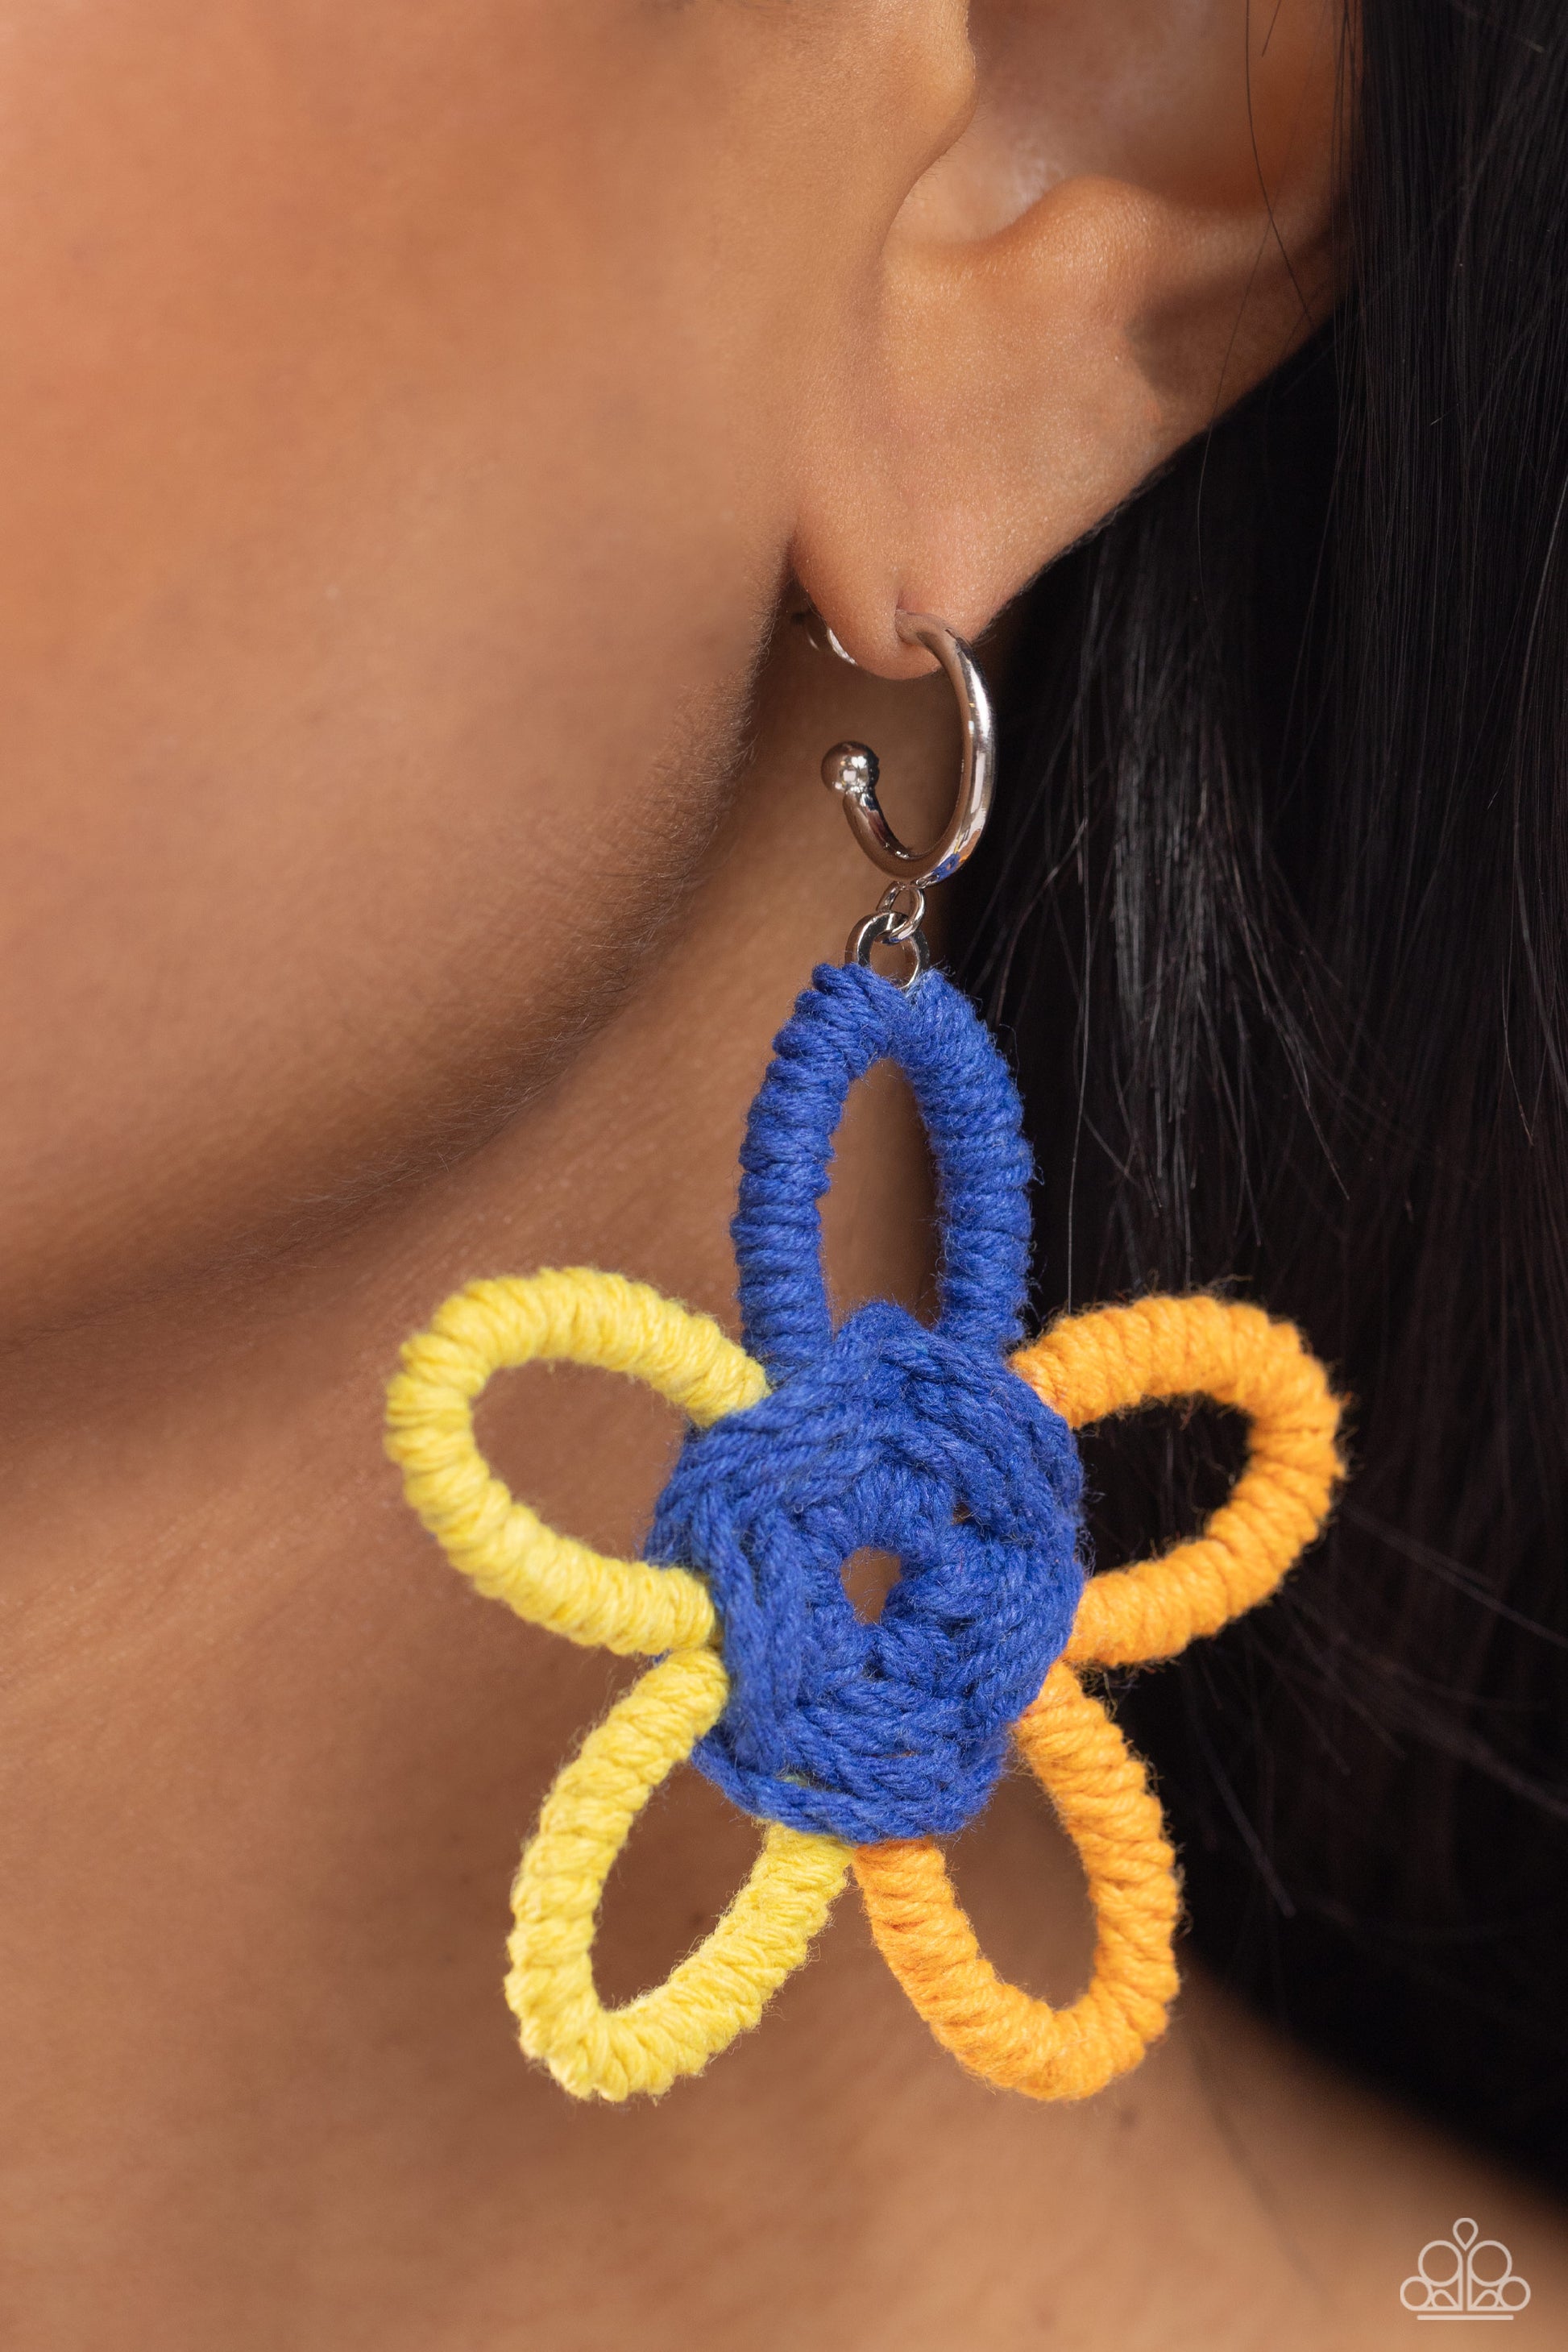 Spin a Yarn Orange Hoop Earring - Paparazzi Accessories  Featuring High Visibility, Persian Jewel, and orange yarn, an oversized flower swings freely from a dainty silver hoop, creating a playful lure. Earring attaches to a standard post fitting. Hoop measures approximately 1/2" in diameter.  Sold as one pair of hoop earrings.  P5HO-OGXX-015XX